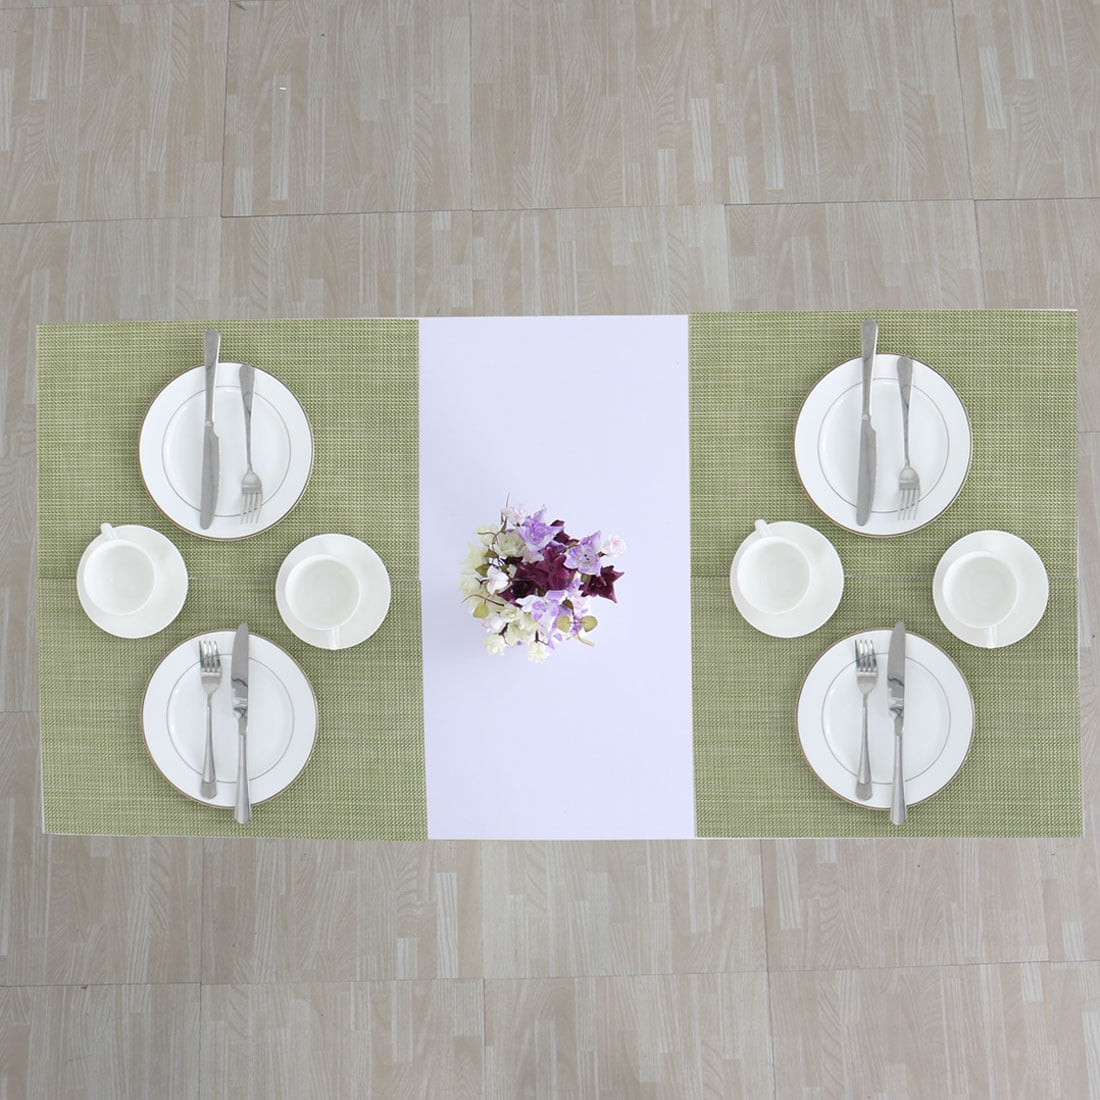 Details about   PVC Sector Imitation Bamboo Placemat Heat Insulation Kitchen Non-Slip Table Mat 